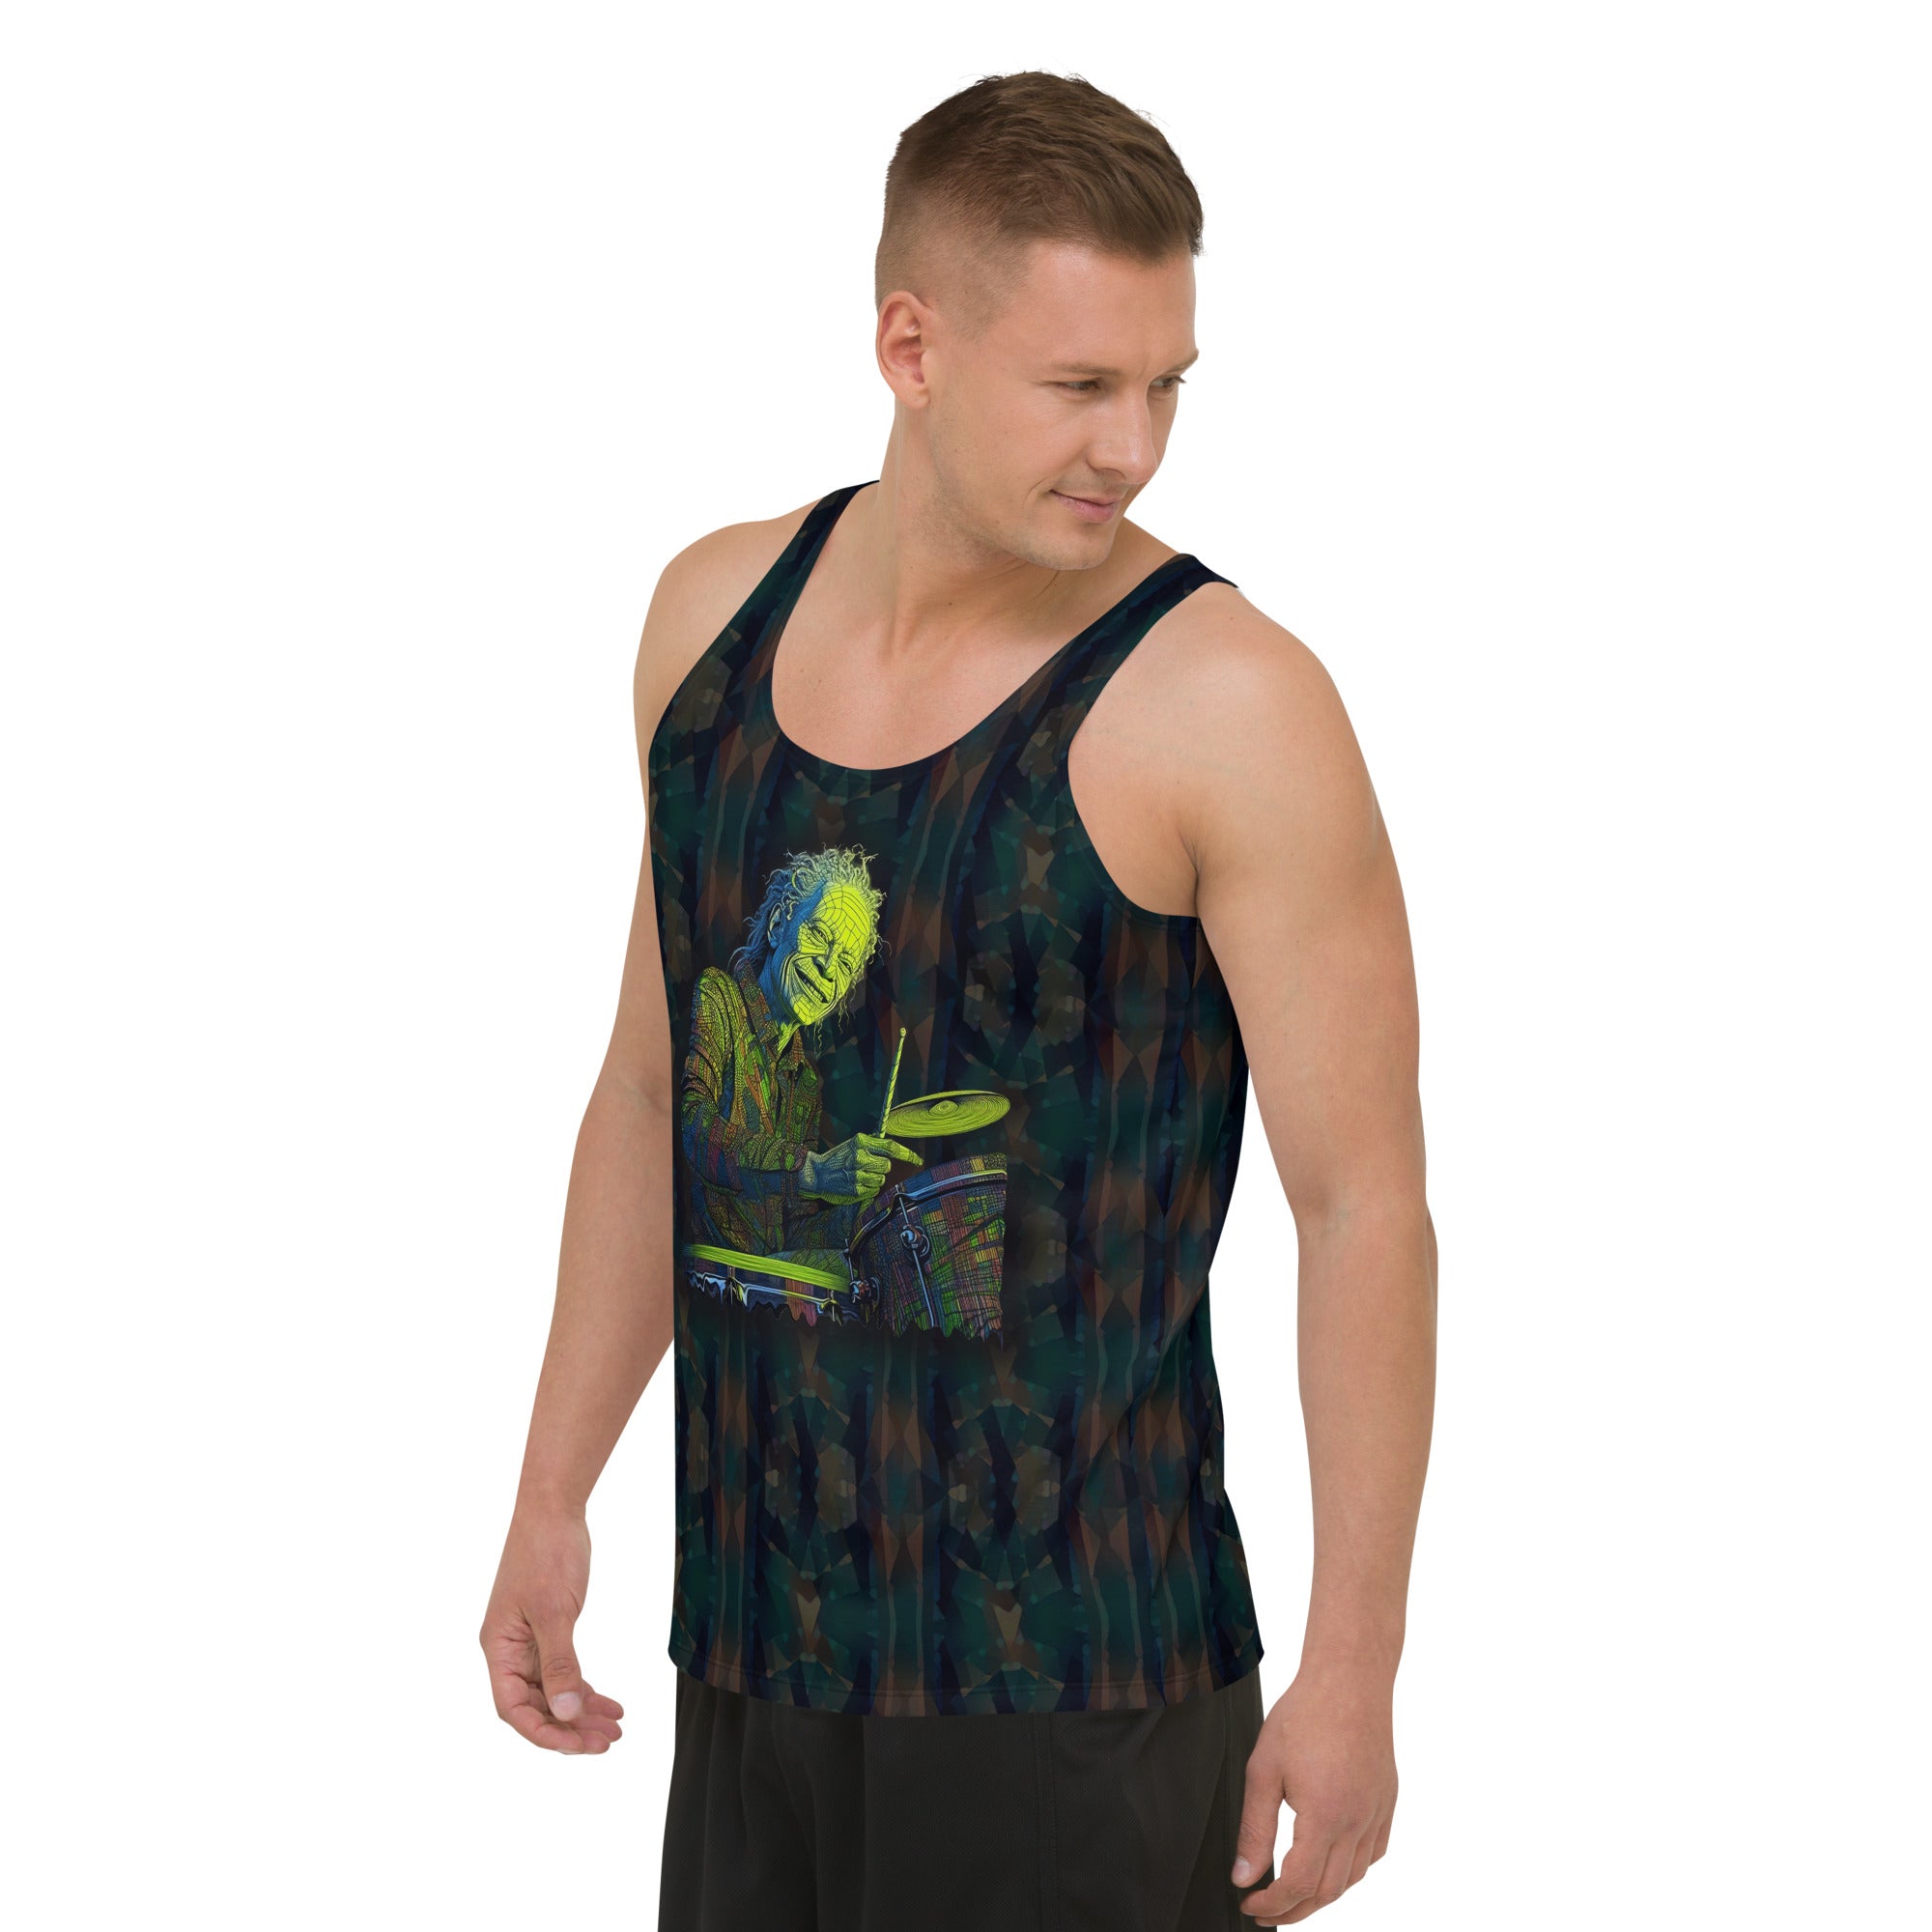 Model wearing Botanical Bliss Men's Tank Top with jeans.